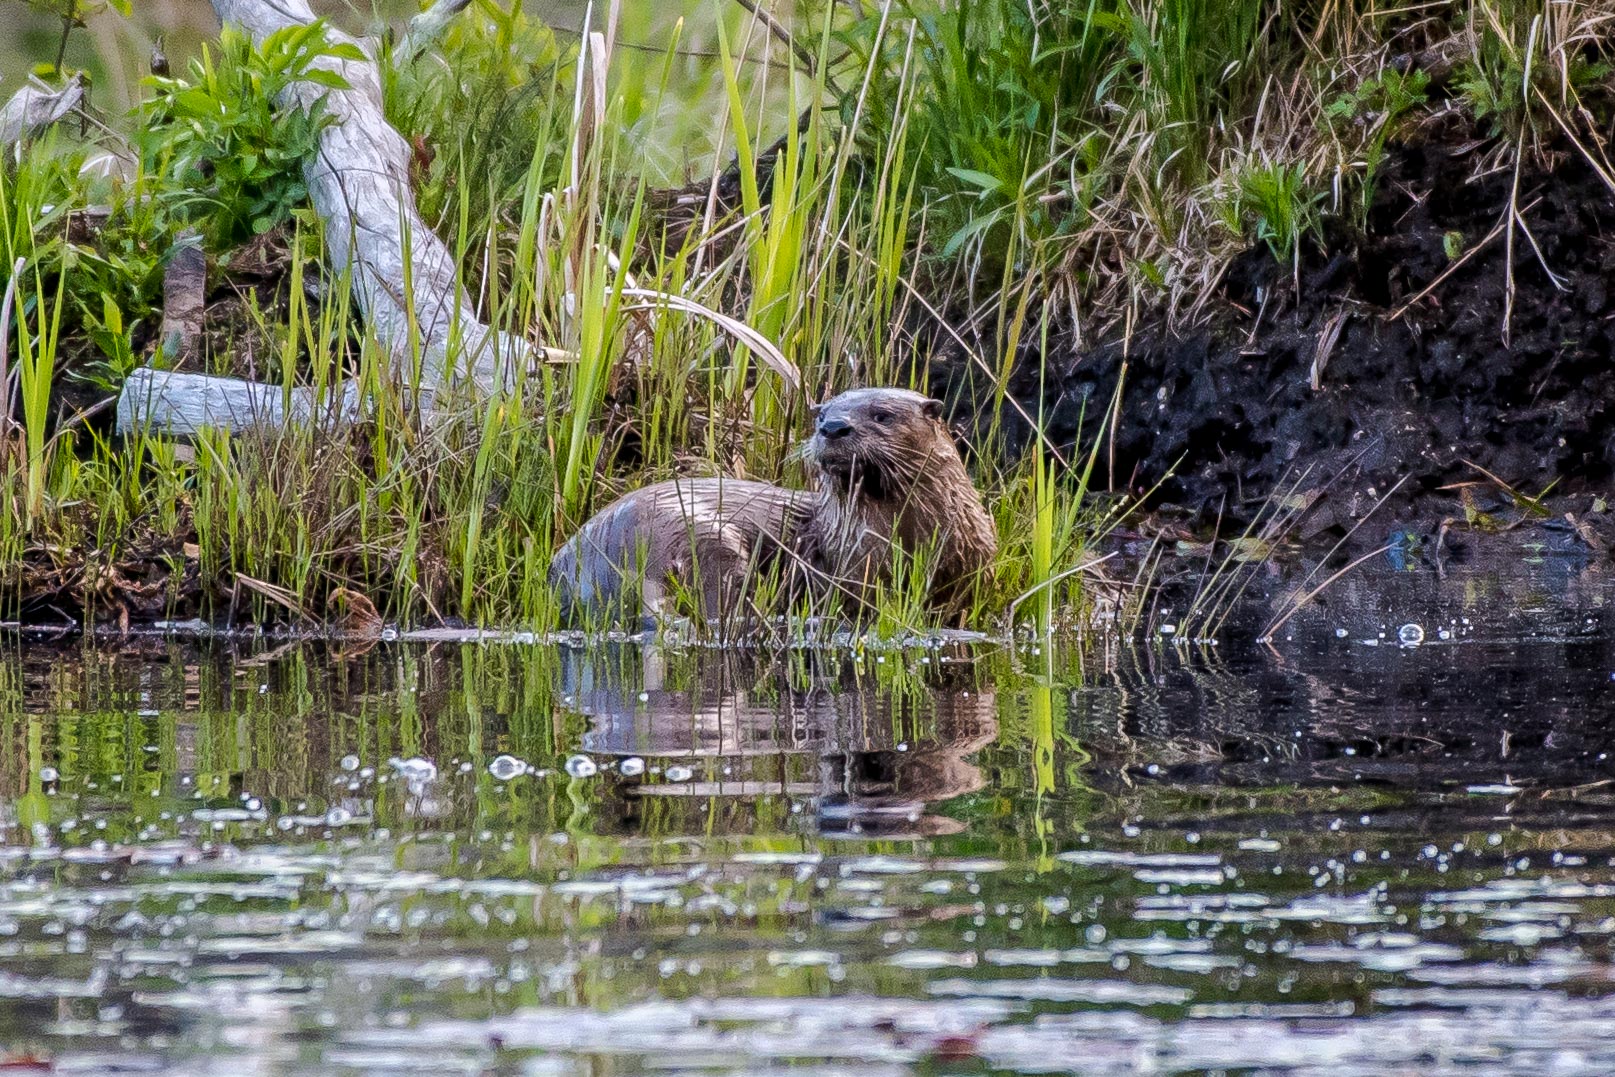   The same otter as in the last picture...... 5/18/16  